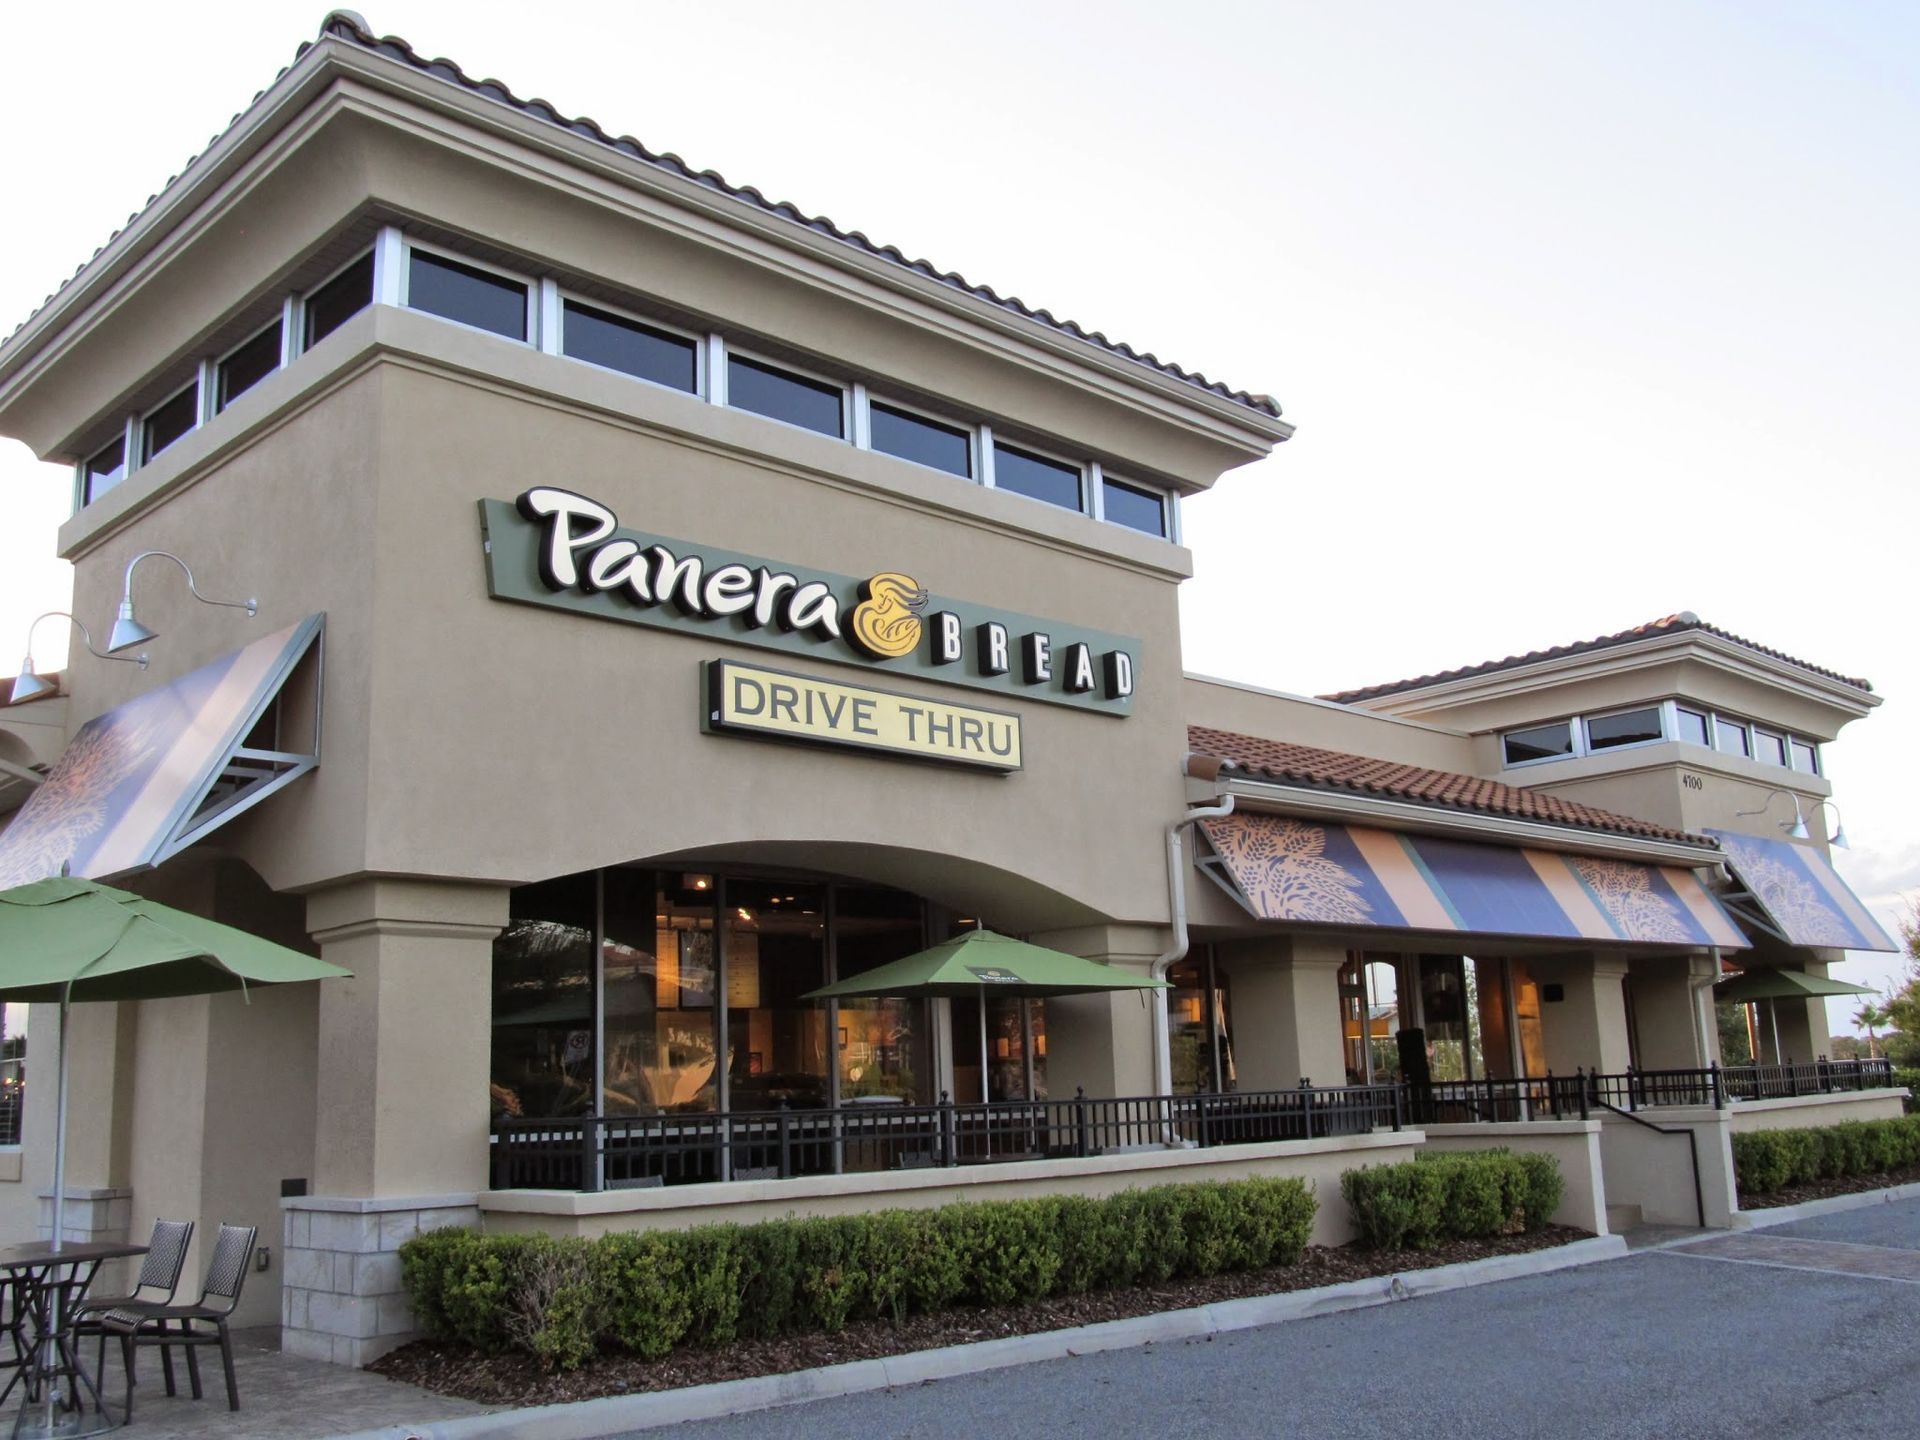 Outside view of a Panera Bread restaurant.